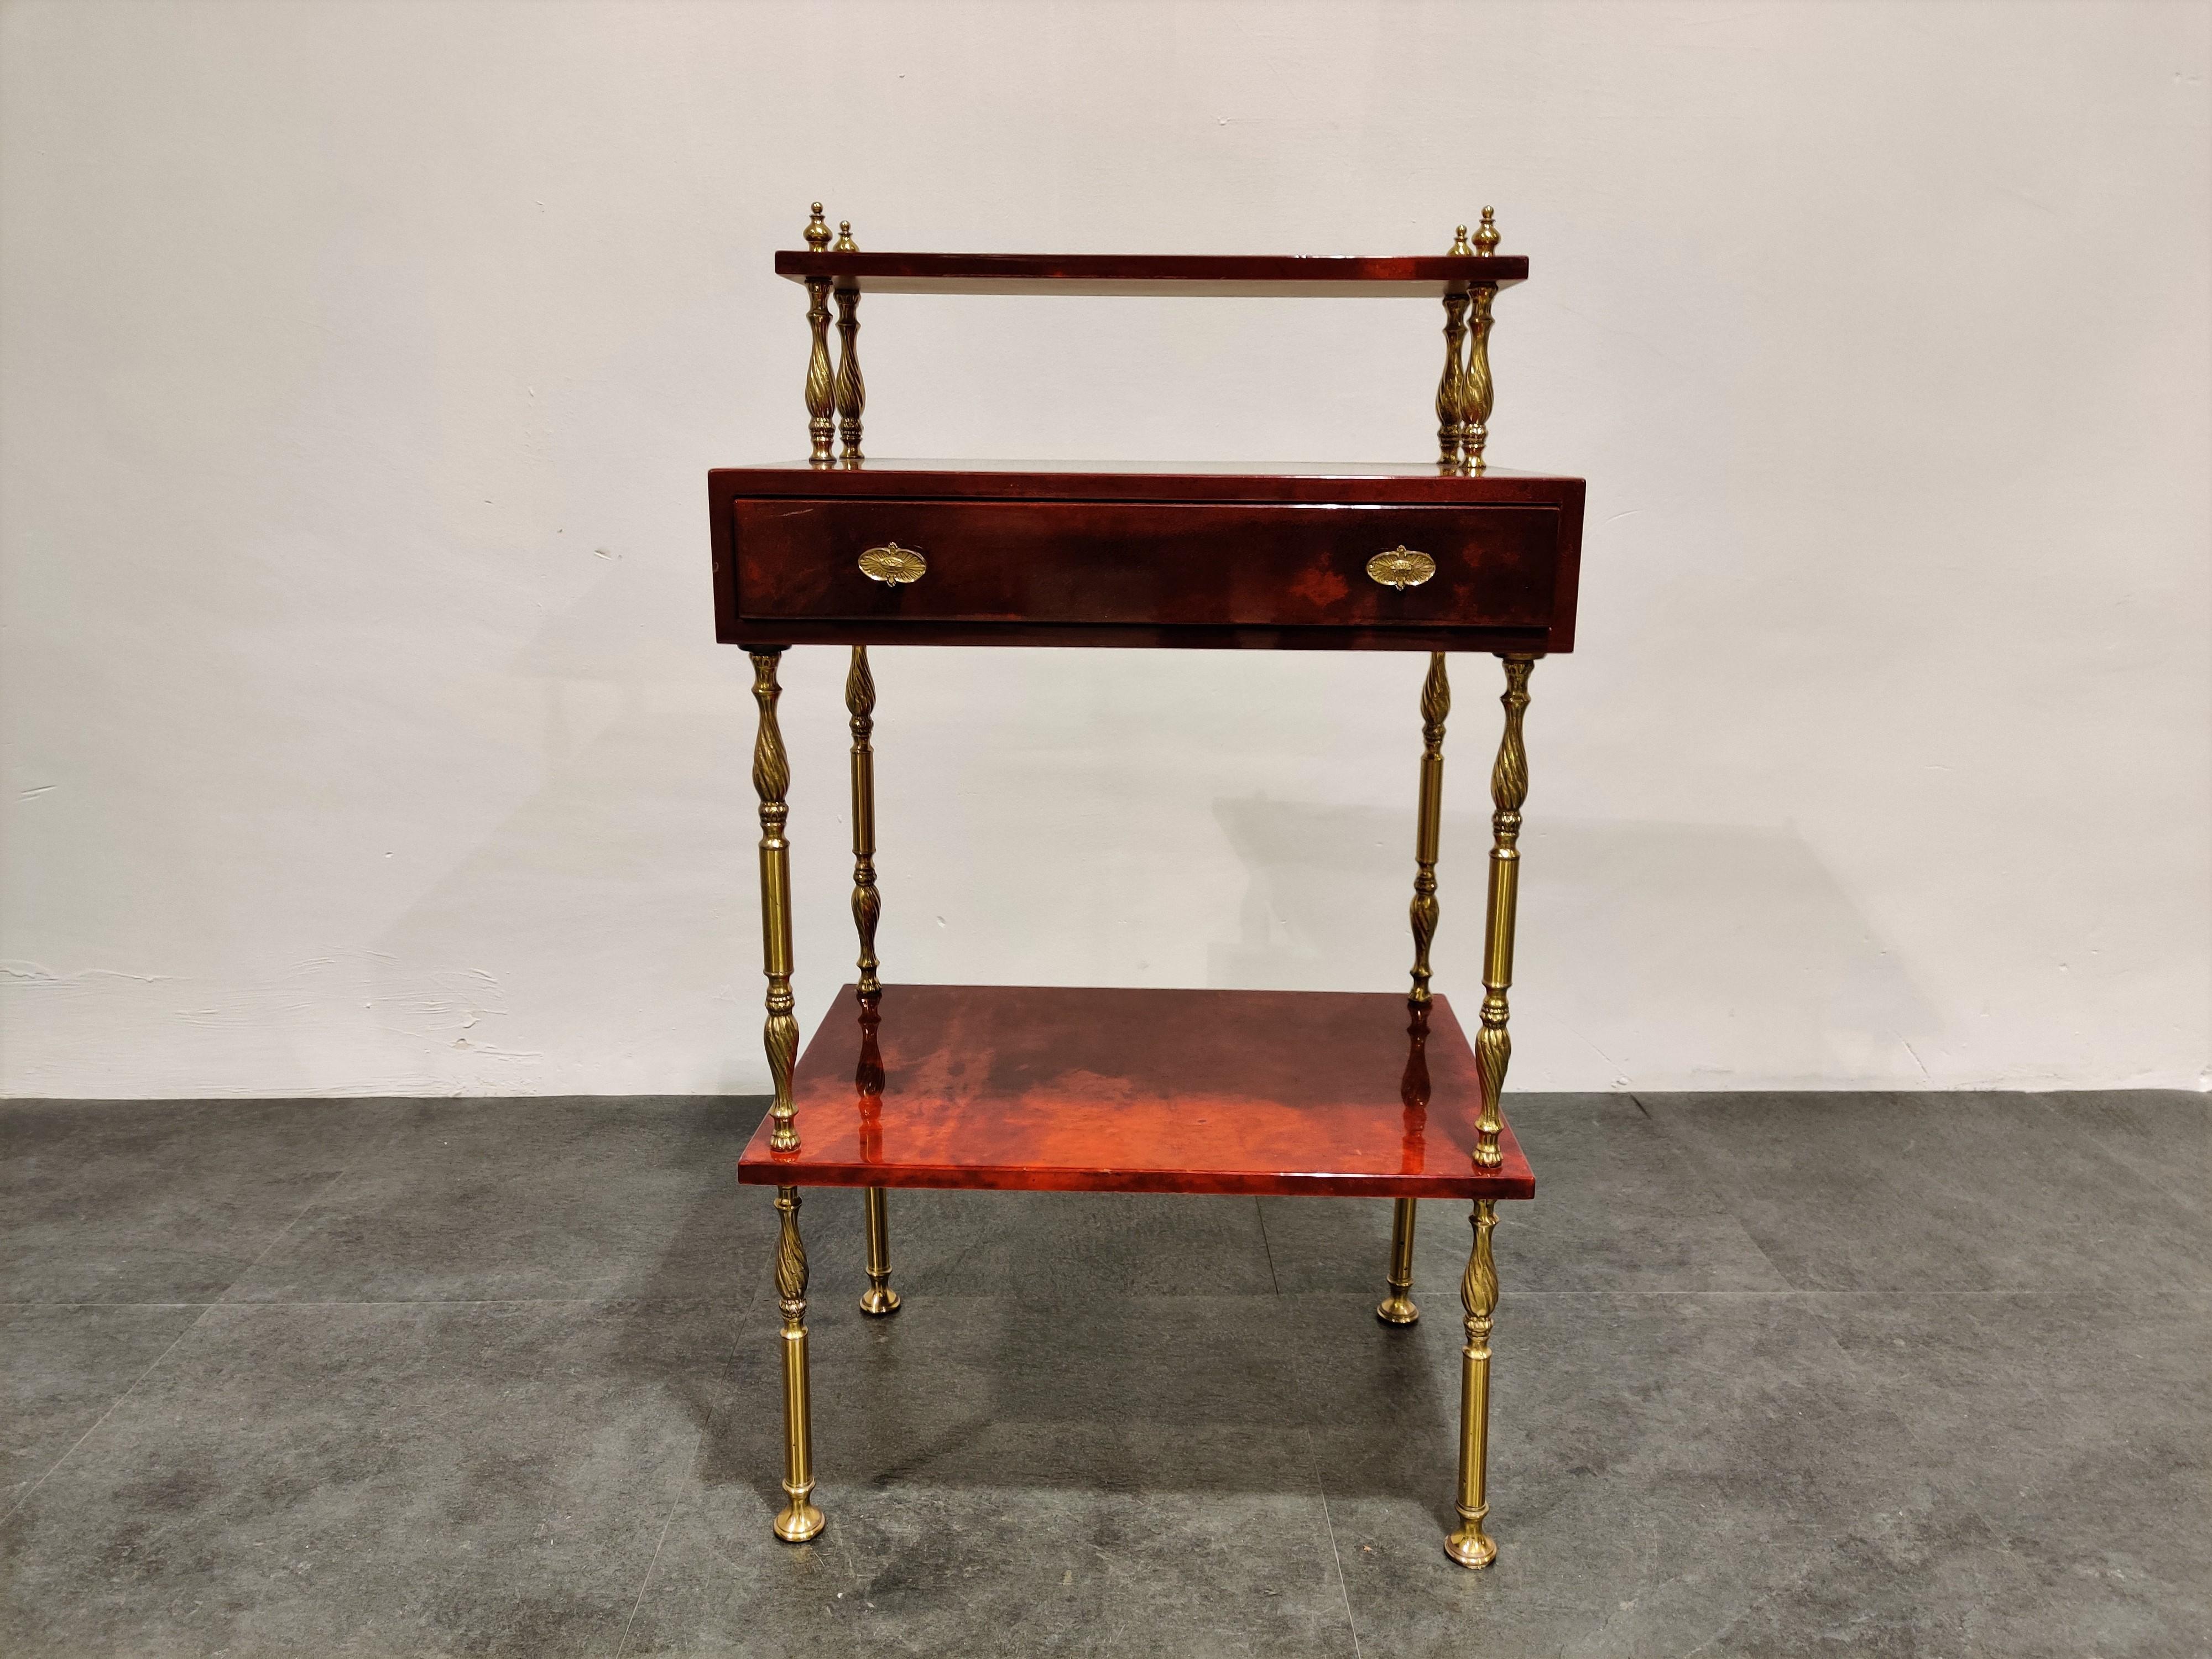 Very unique Aldo Tura red lacquered Goatskin or parchment side table. 

Constructed of thickly lacquered goatskin / parchment and gilt metal hardware. 

Comes with a doubled handle drawer.

Good condition.

1960s -